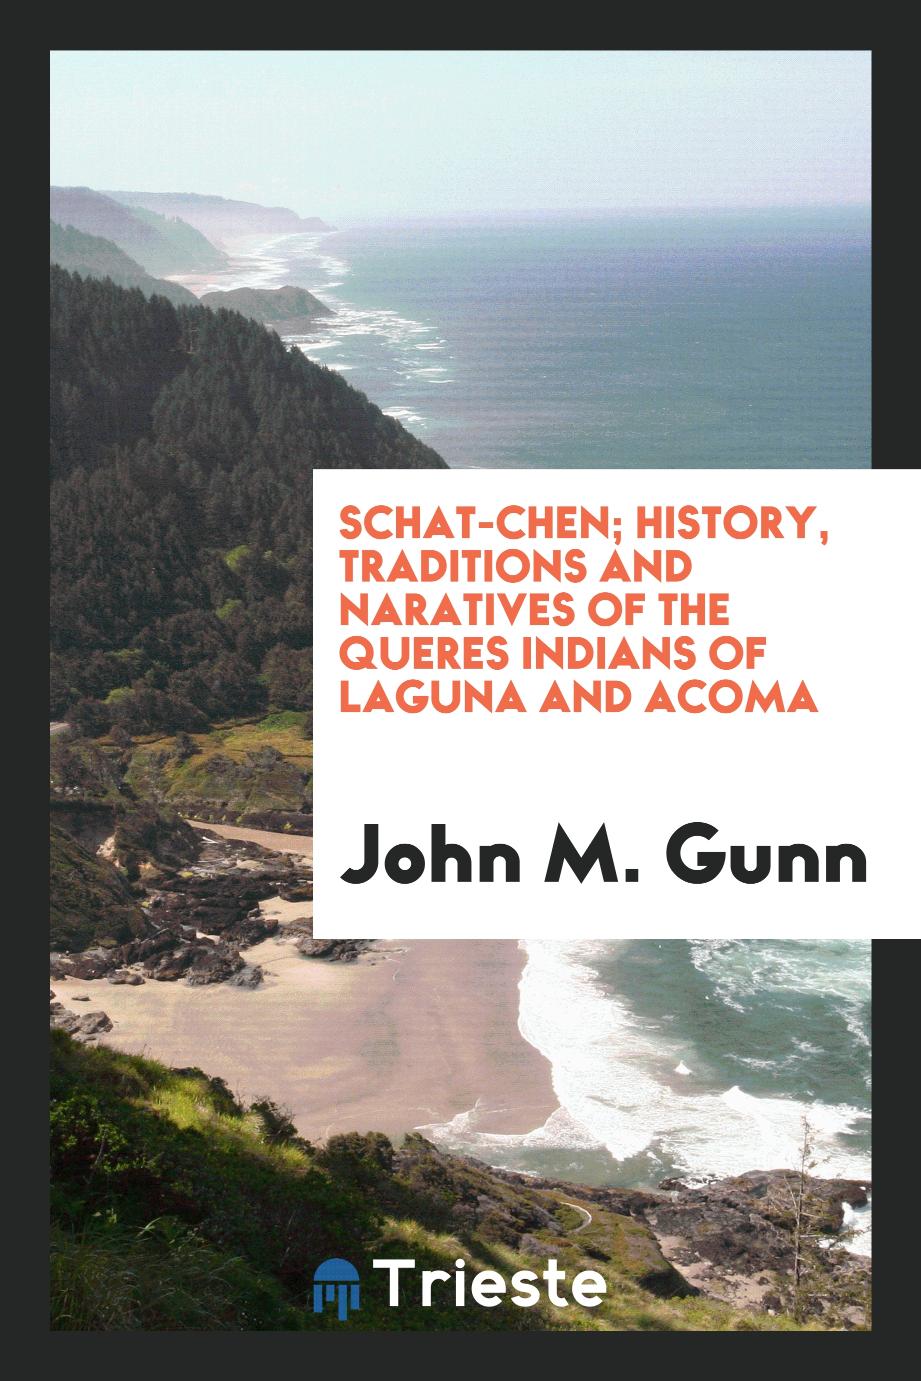 Schat-chen; history, traditions and naratives of the Queres Indians of Laguna and Acoma